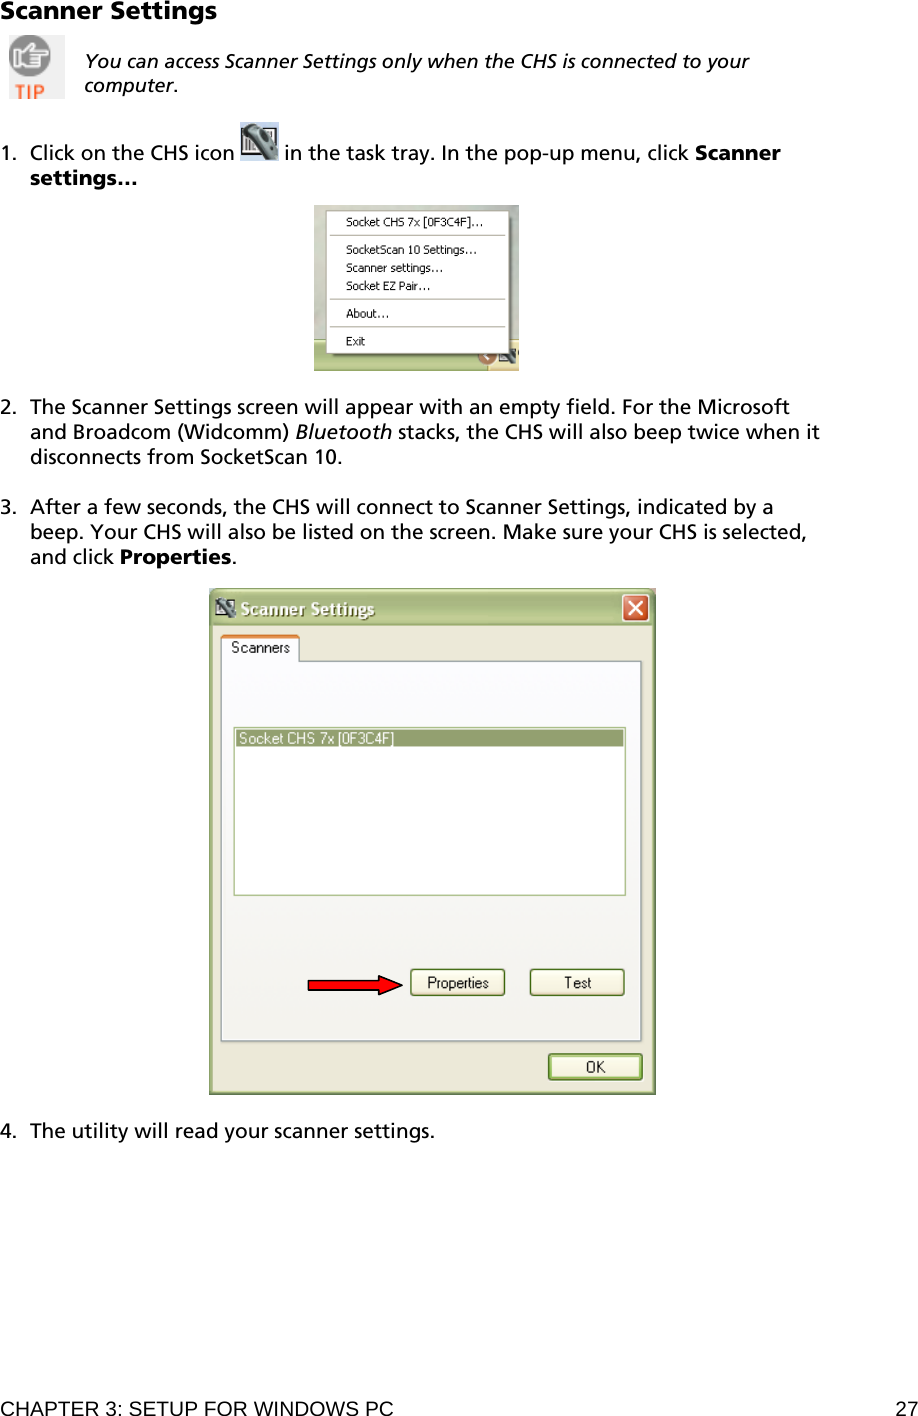 CHAPTER 3: SETUP FOR WINDOWS PC  27 Scanner Settings  You can access Scanner Settings only when the CHS is connected to your computer.    1. Click on the CHS icon   in the task tray. In the pop-up menu, click Scanner settings…    2. The Scanner Settings screen will appear with an empty field. For the Microsoft and Broadcom (Widcomm) Bluetooth stacks, the CHS will also beep twice when it disconnects from SocketScan 10.  3. After a few seconds, the CHS will connect to Scanner Settings, indicated by a beep. Your CHS will also be listed on the screen. Make sure your CHS is selected, and click Properties.      4. The utility will read your scanner settings. 